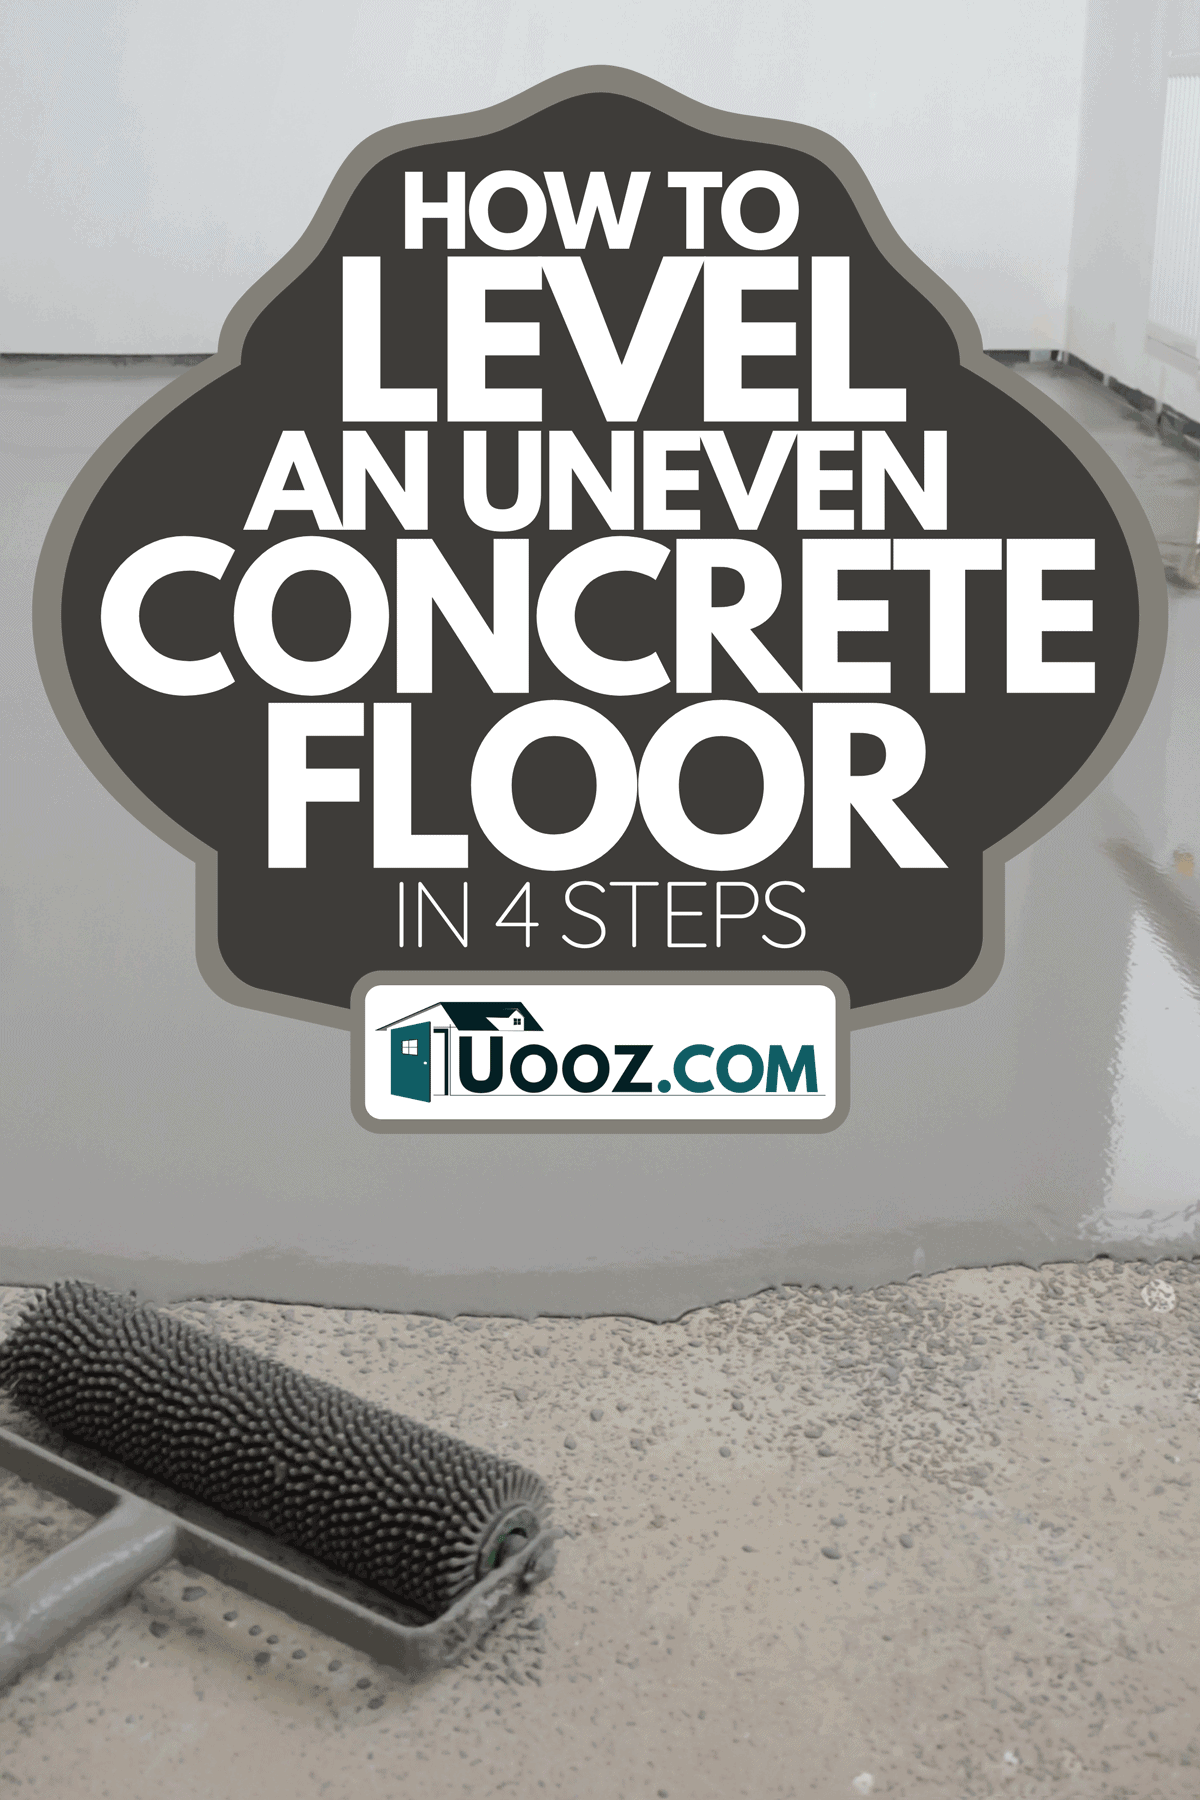 Self-leveling with a mixture of cement floors, How To Level An Uneven Concrete Floor In 4 Steps